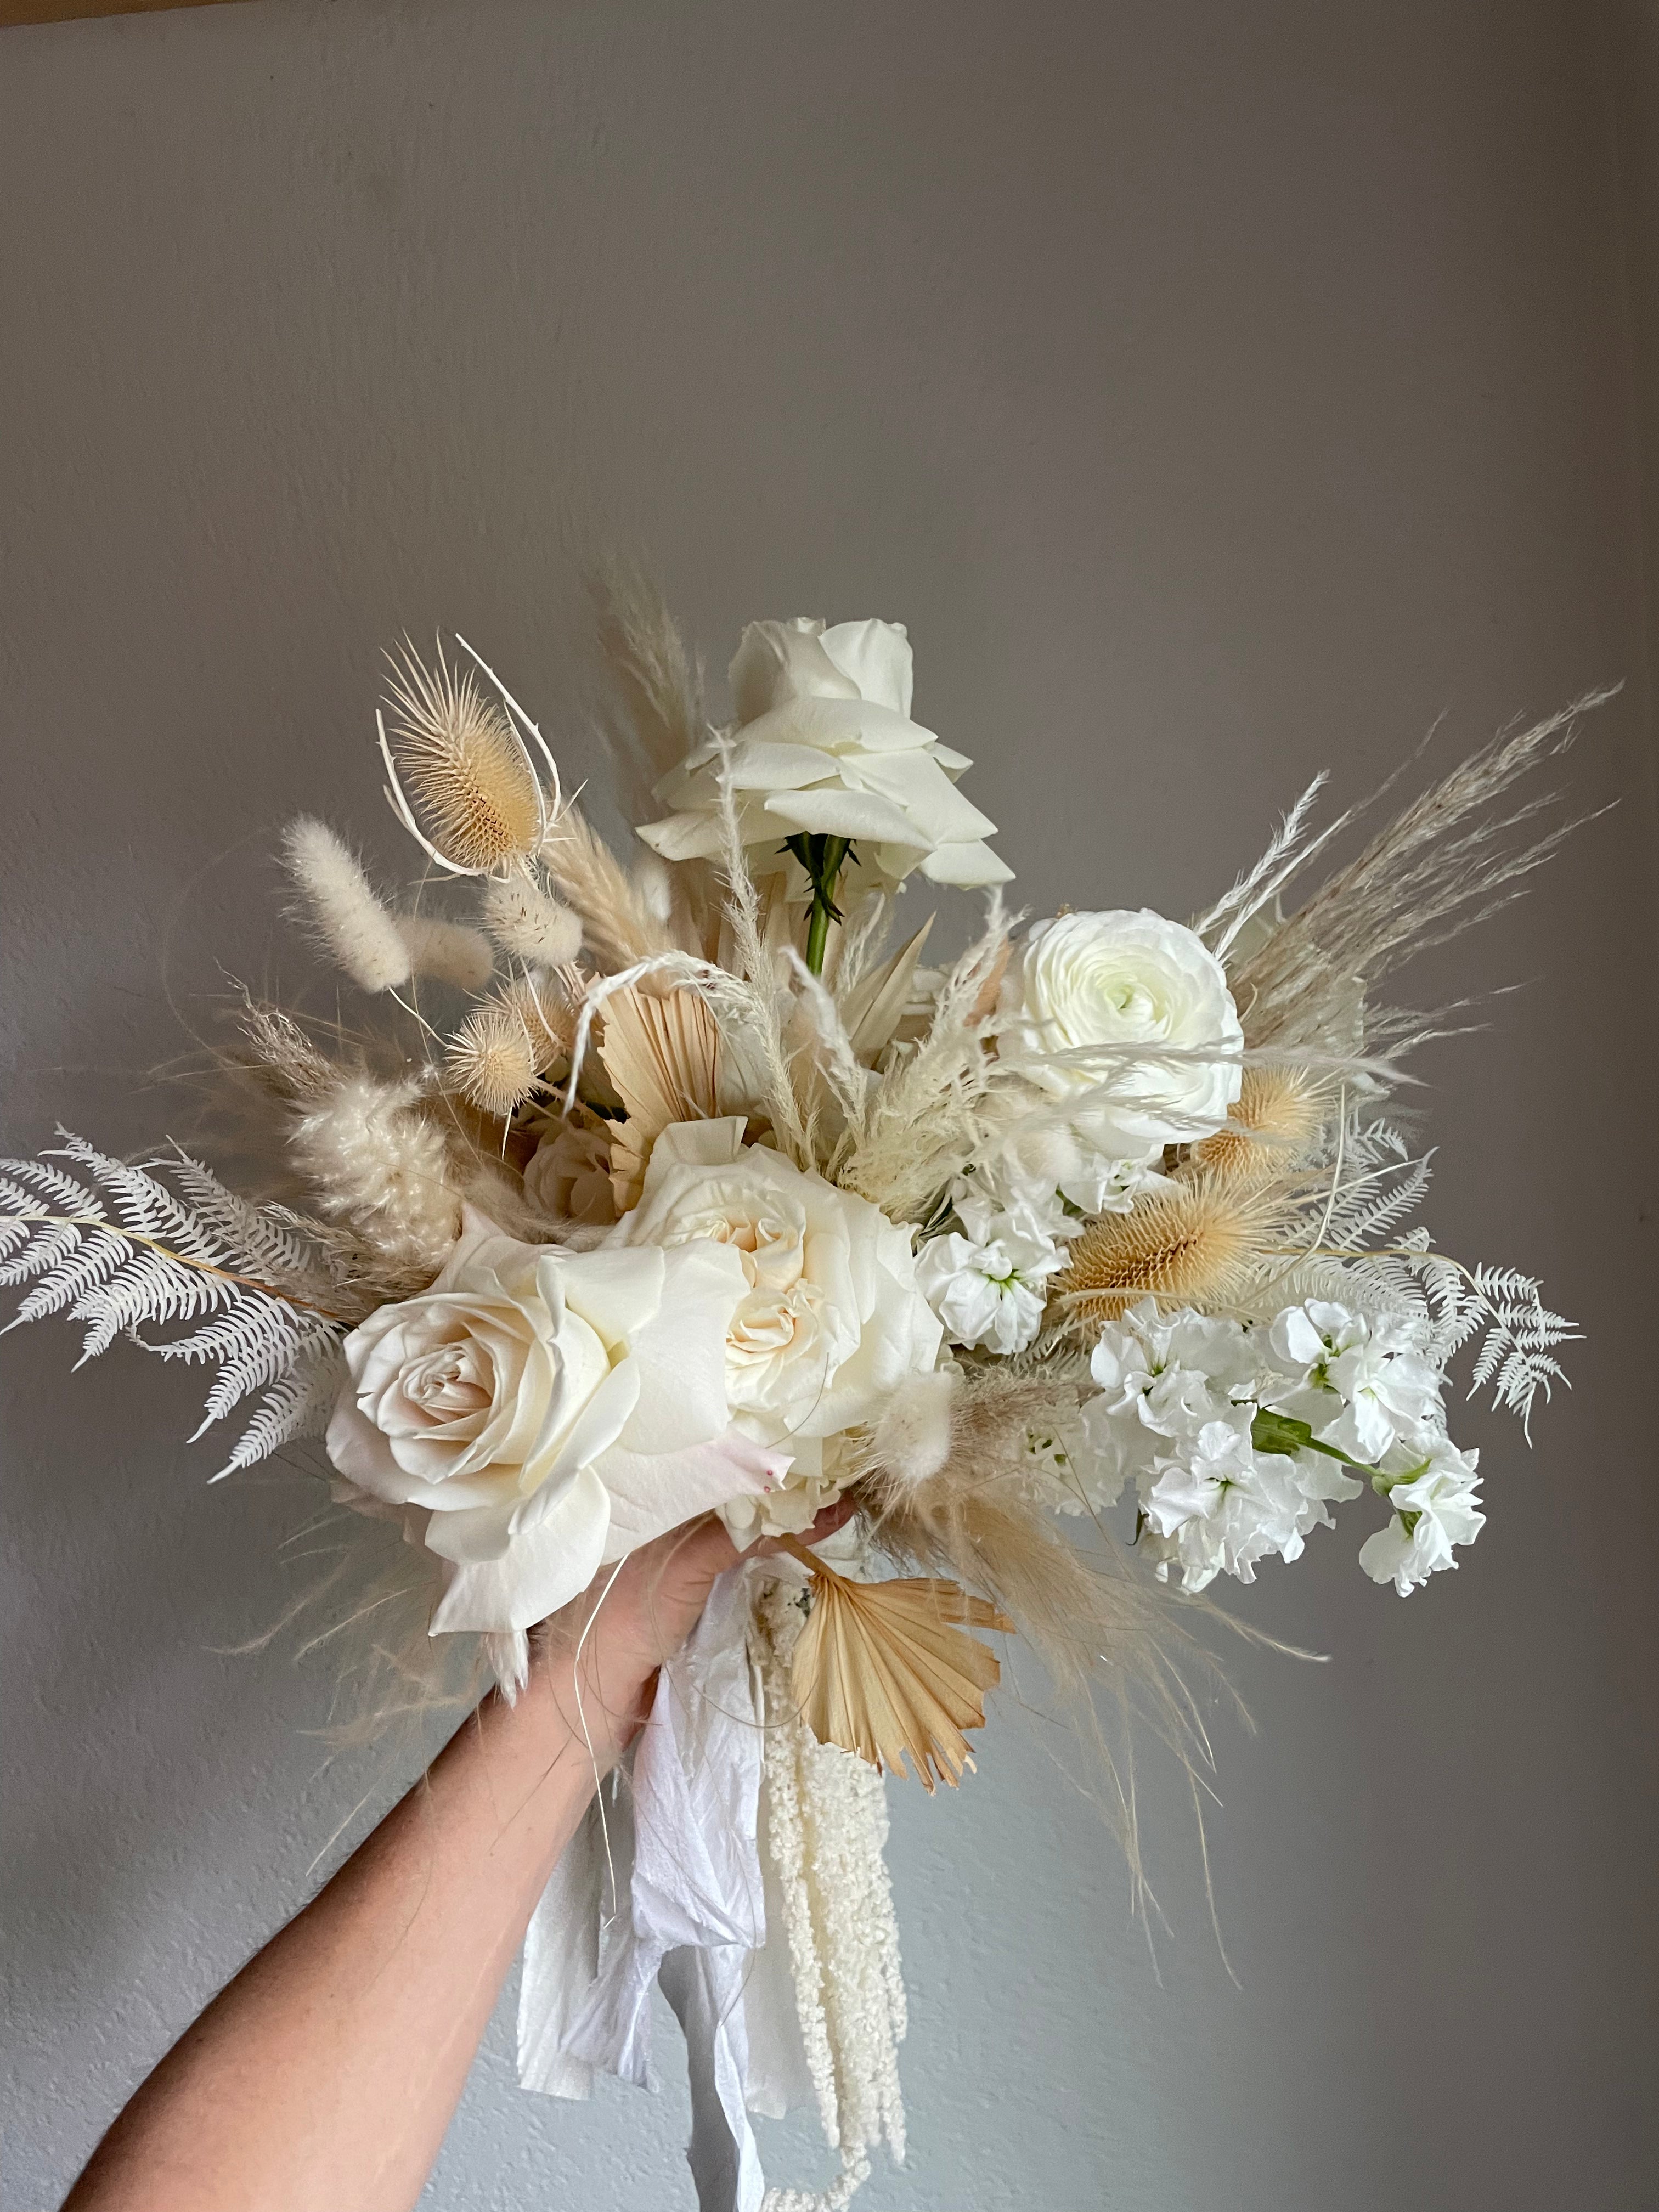 boho wedding bouquet with white and cream fresh flowers, dried and bleached flora